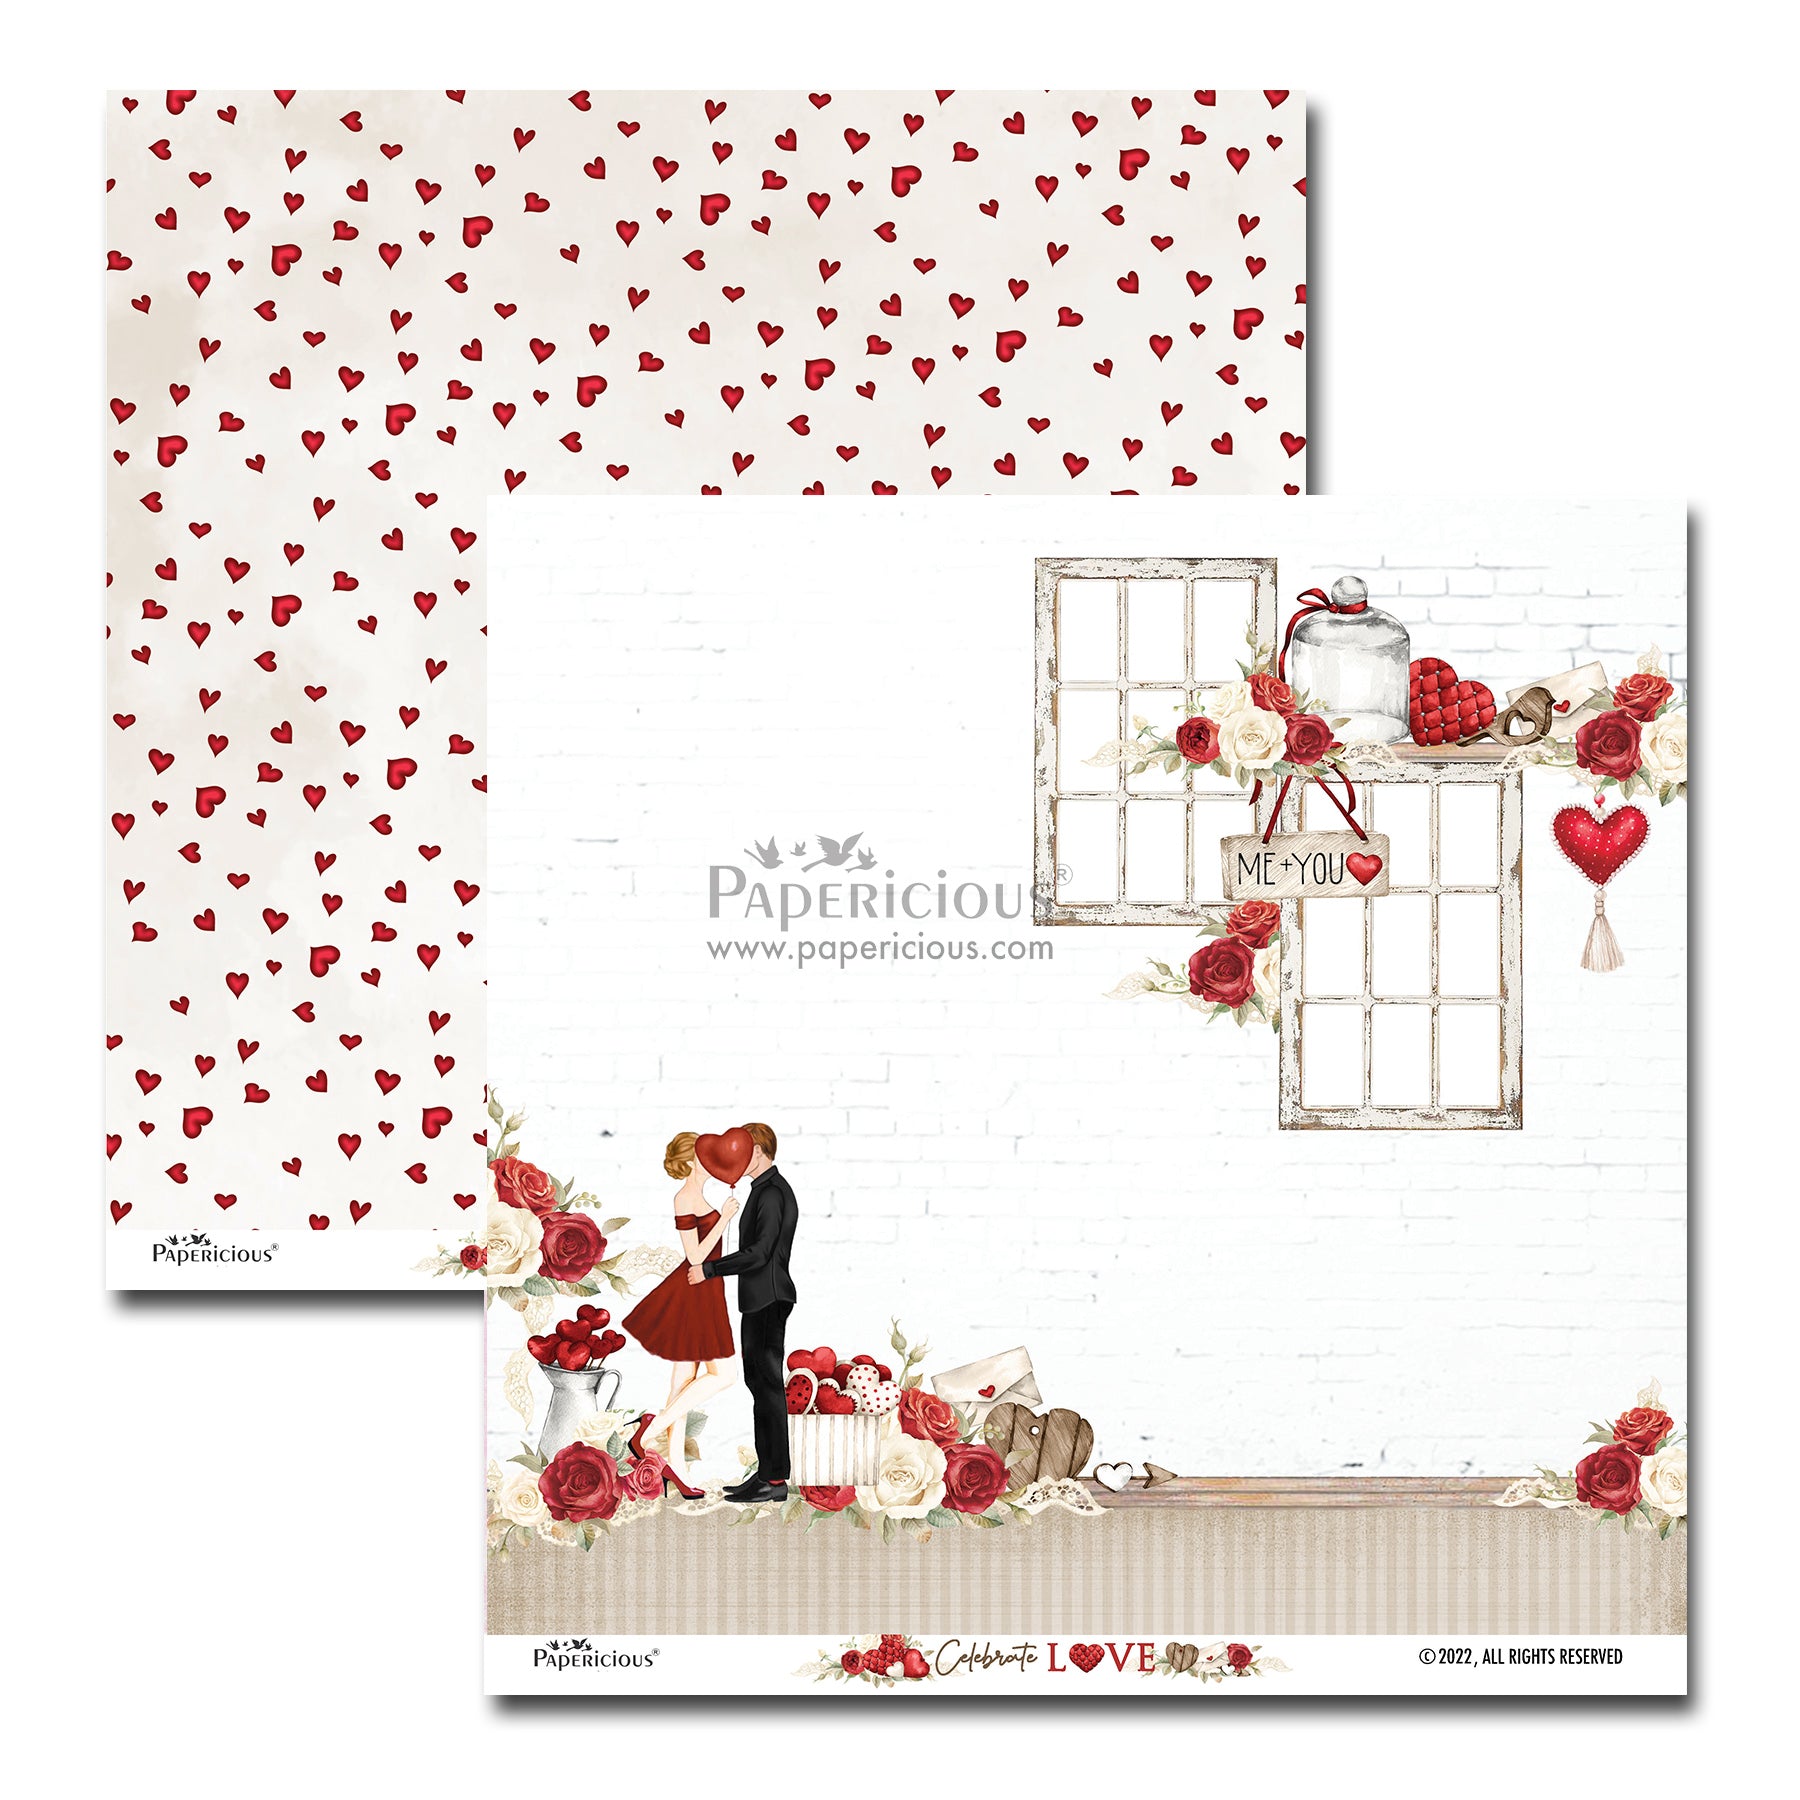 PAPERICIOUS - Celebrate Love -  Designer Pattern Printed Scrapbook Papers 12x12 inch  / 20 sheets